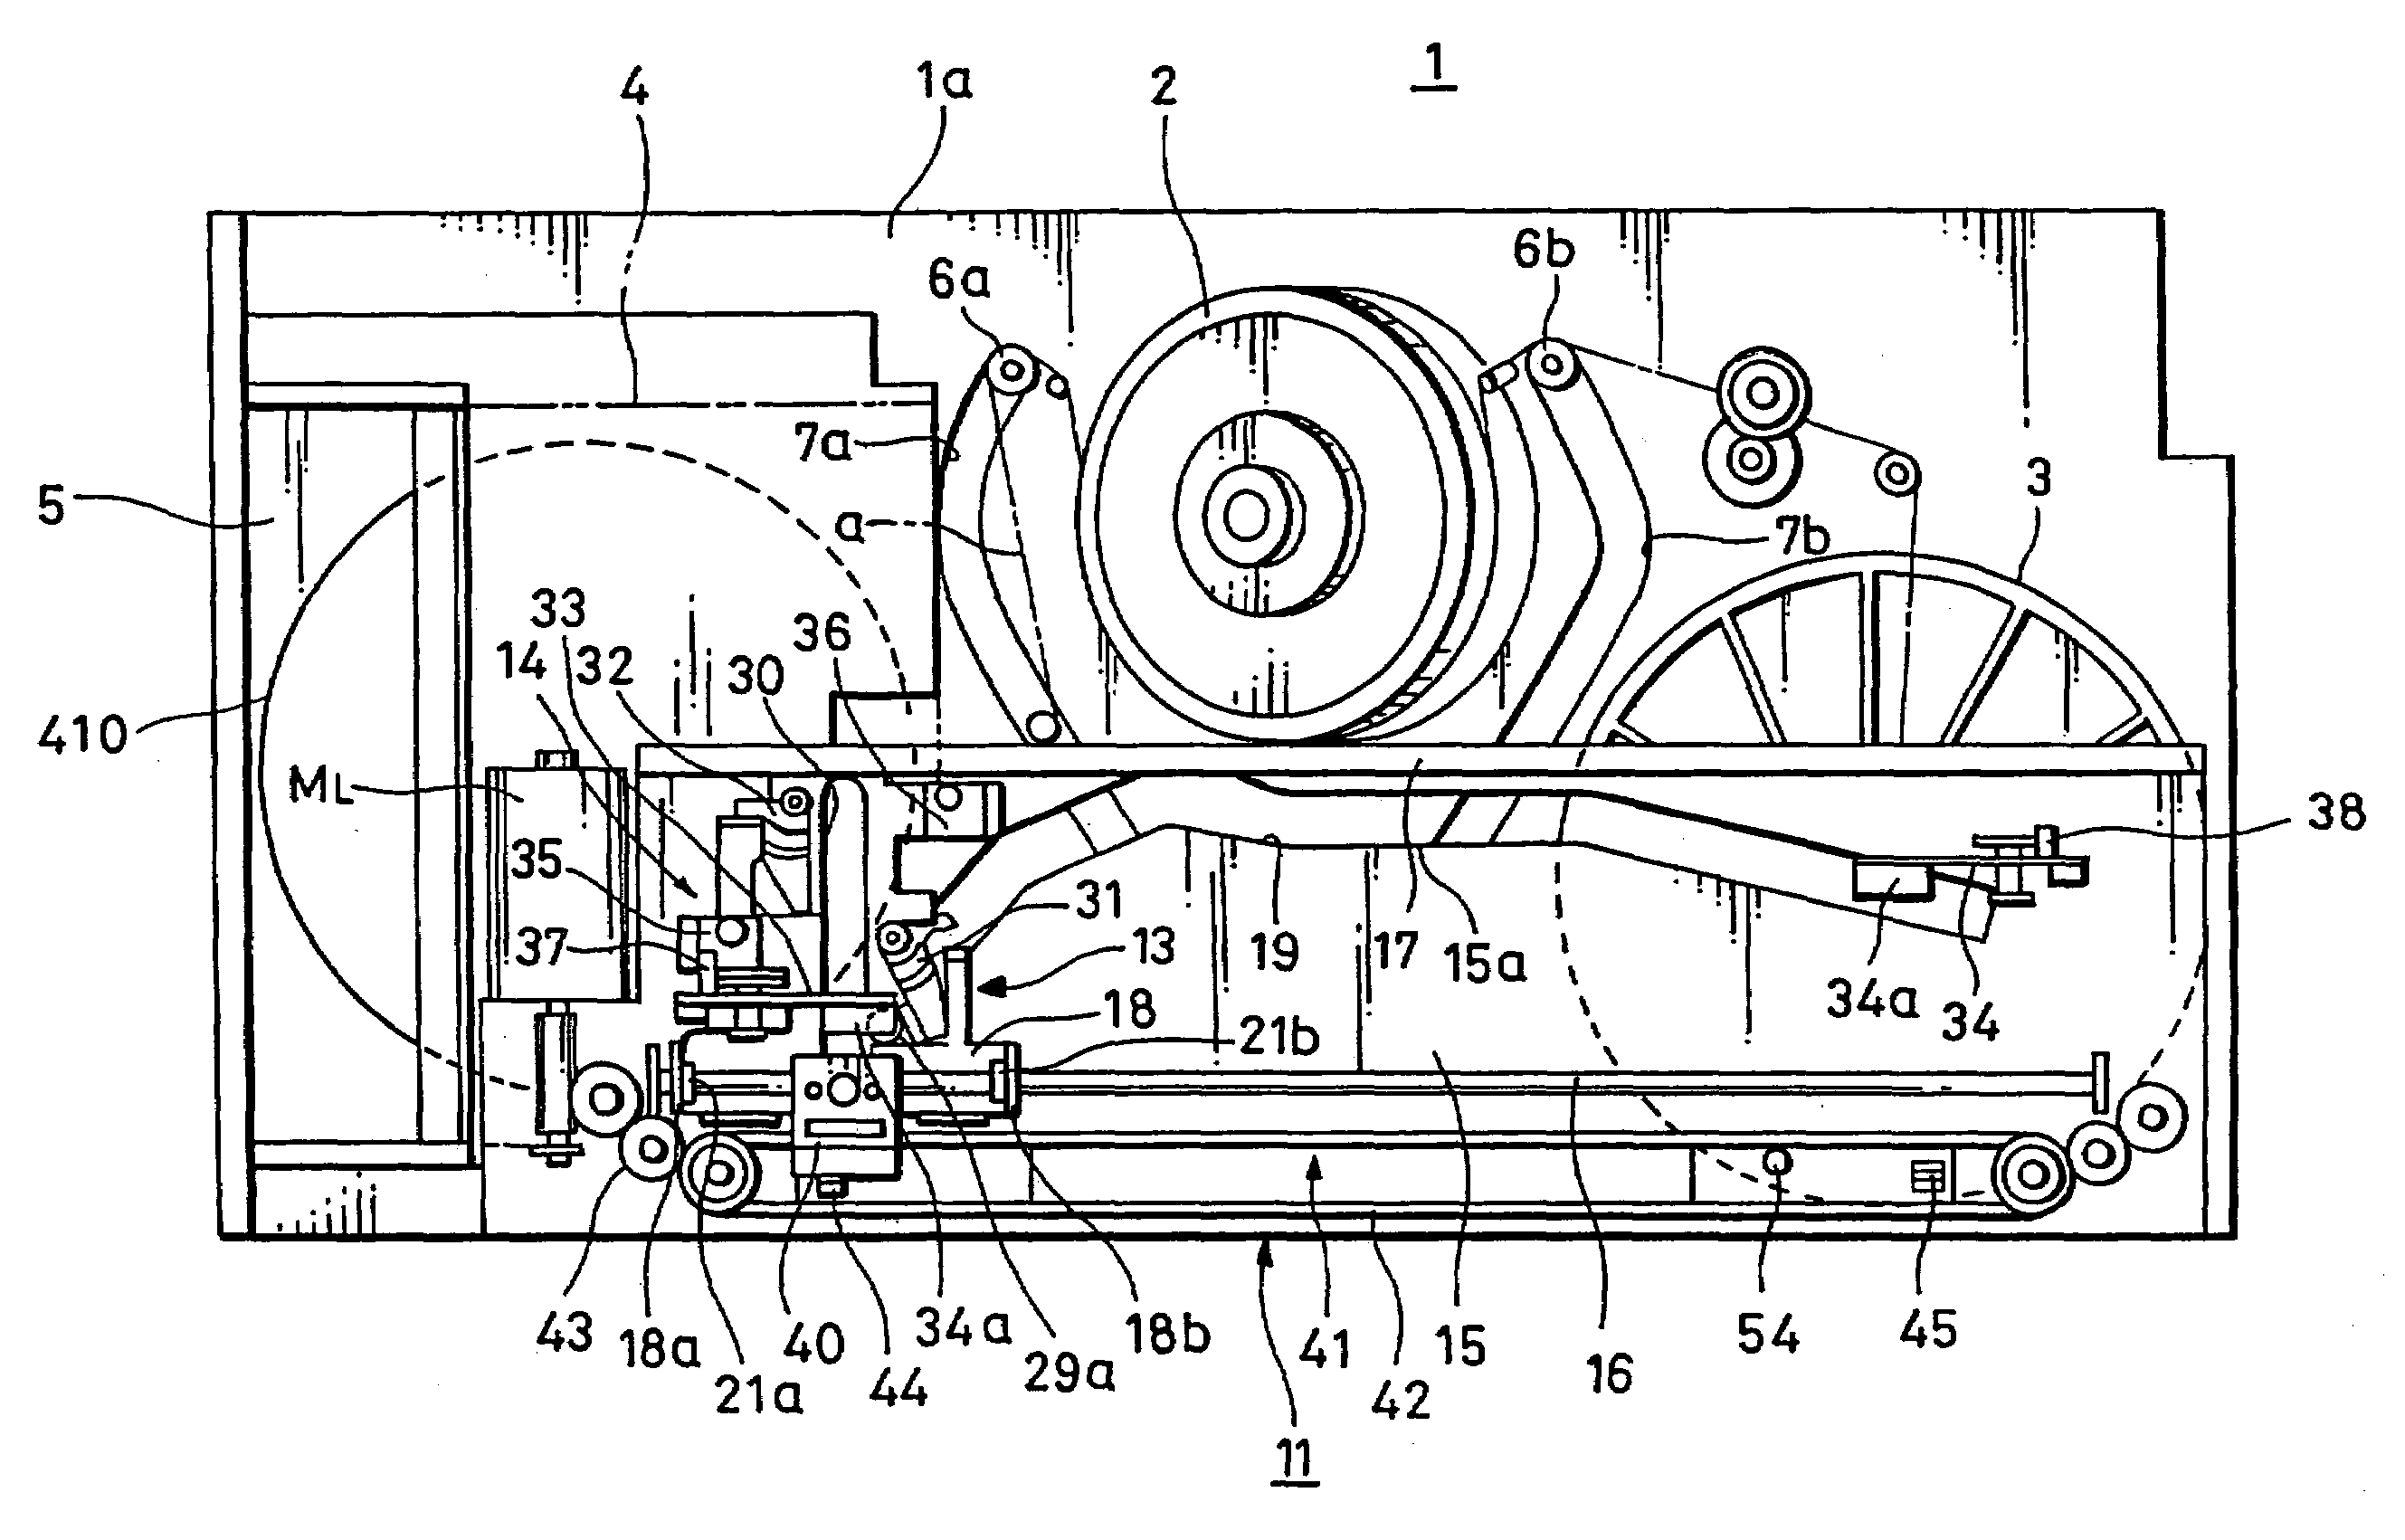 Tape drive device, tape extraction device and tape cassette